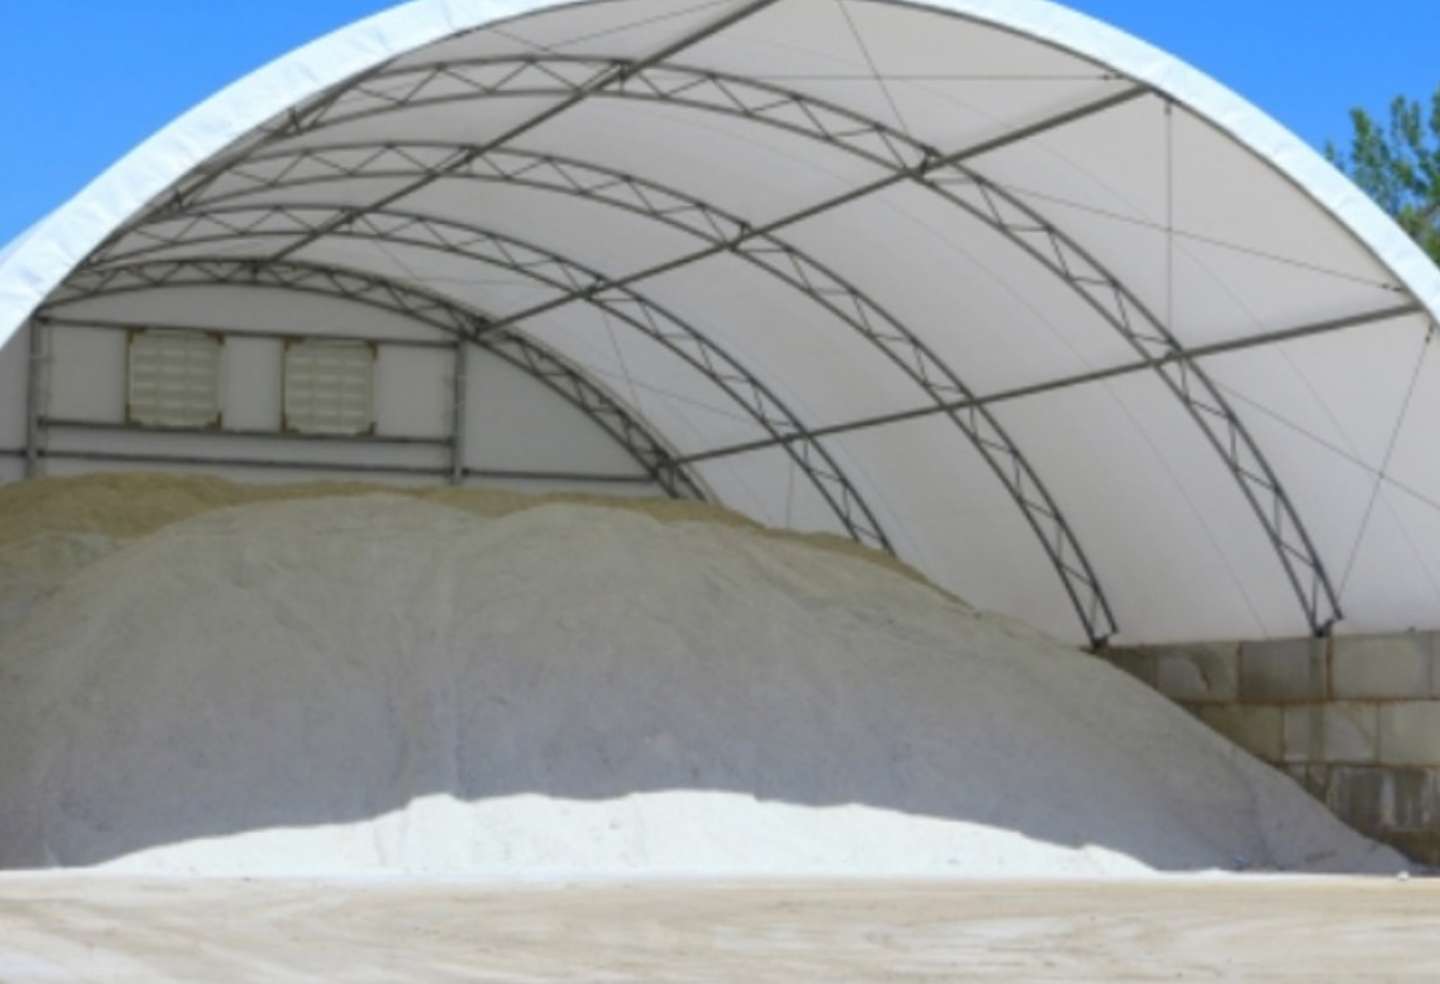 Large pile of winter road salt underneath an awning at the Mar-Co warehouse